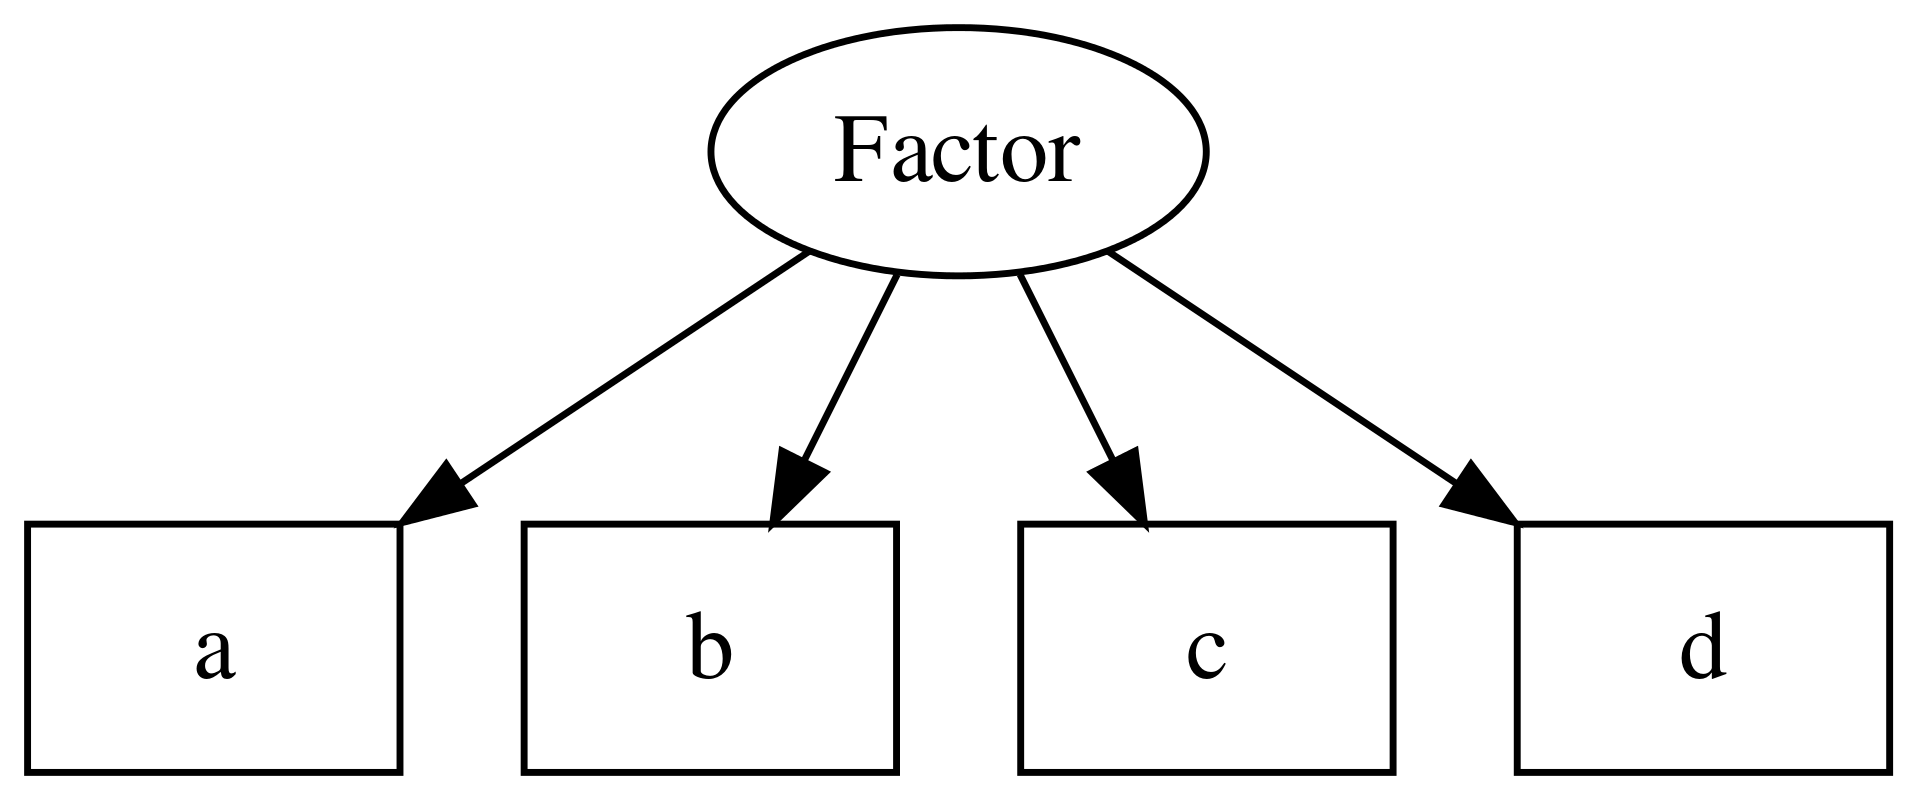 Example of a CFA model, including one latent variable or factor, and 4 observed variables.